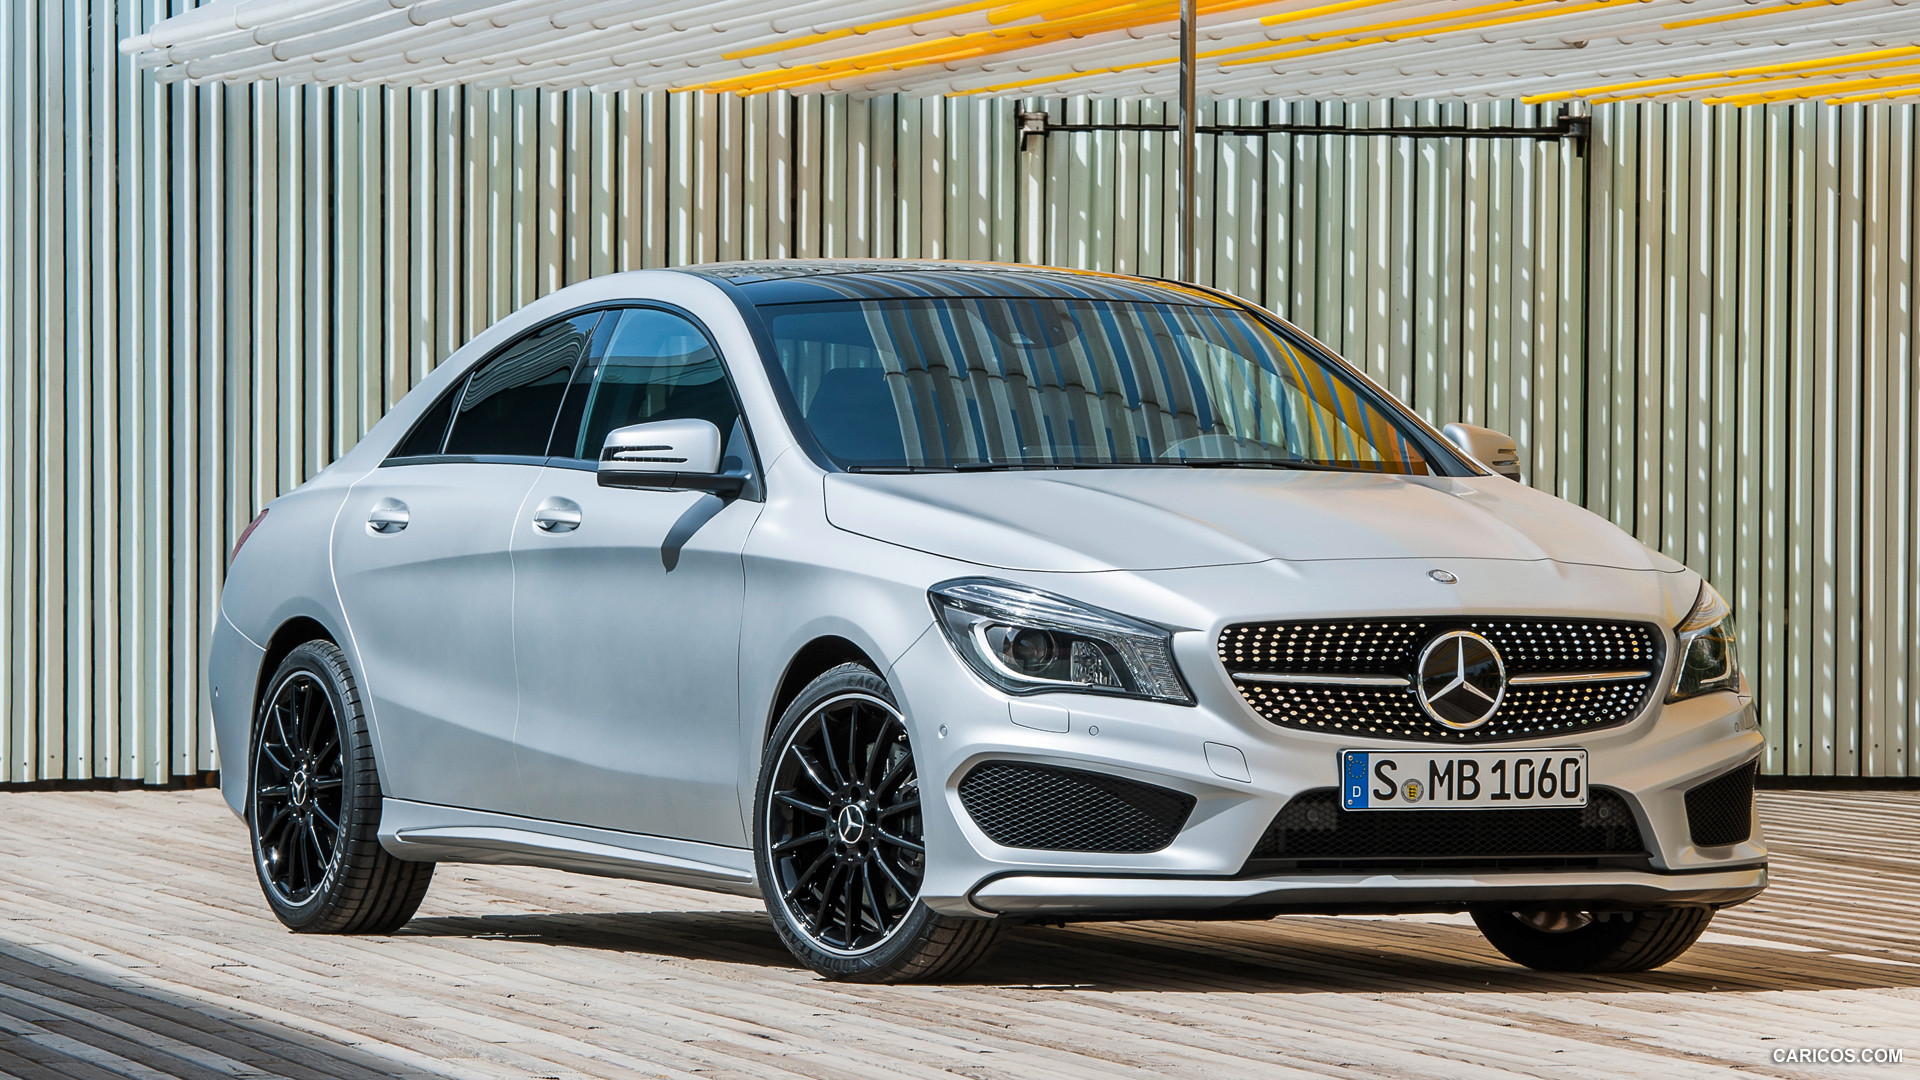 2014 Mercedes-Benz CLA-Class CLA 250 Edition 1 - Front, #29 of 183